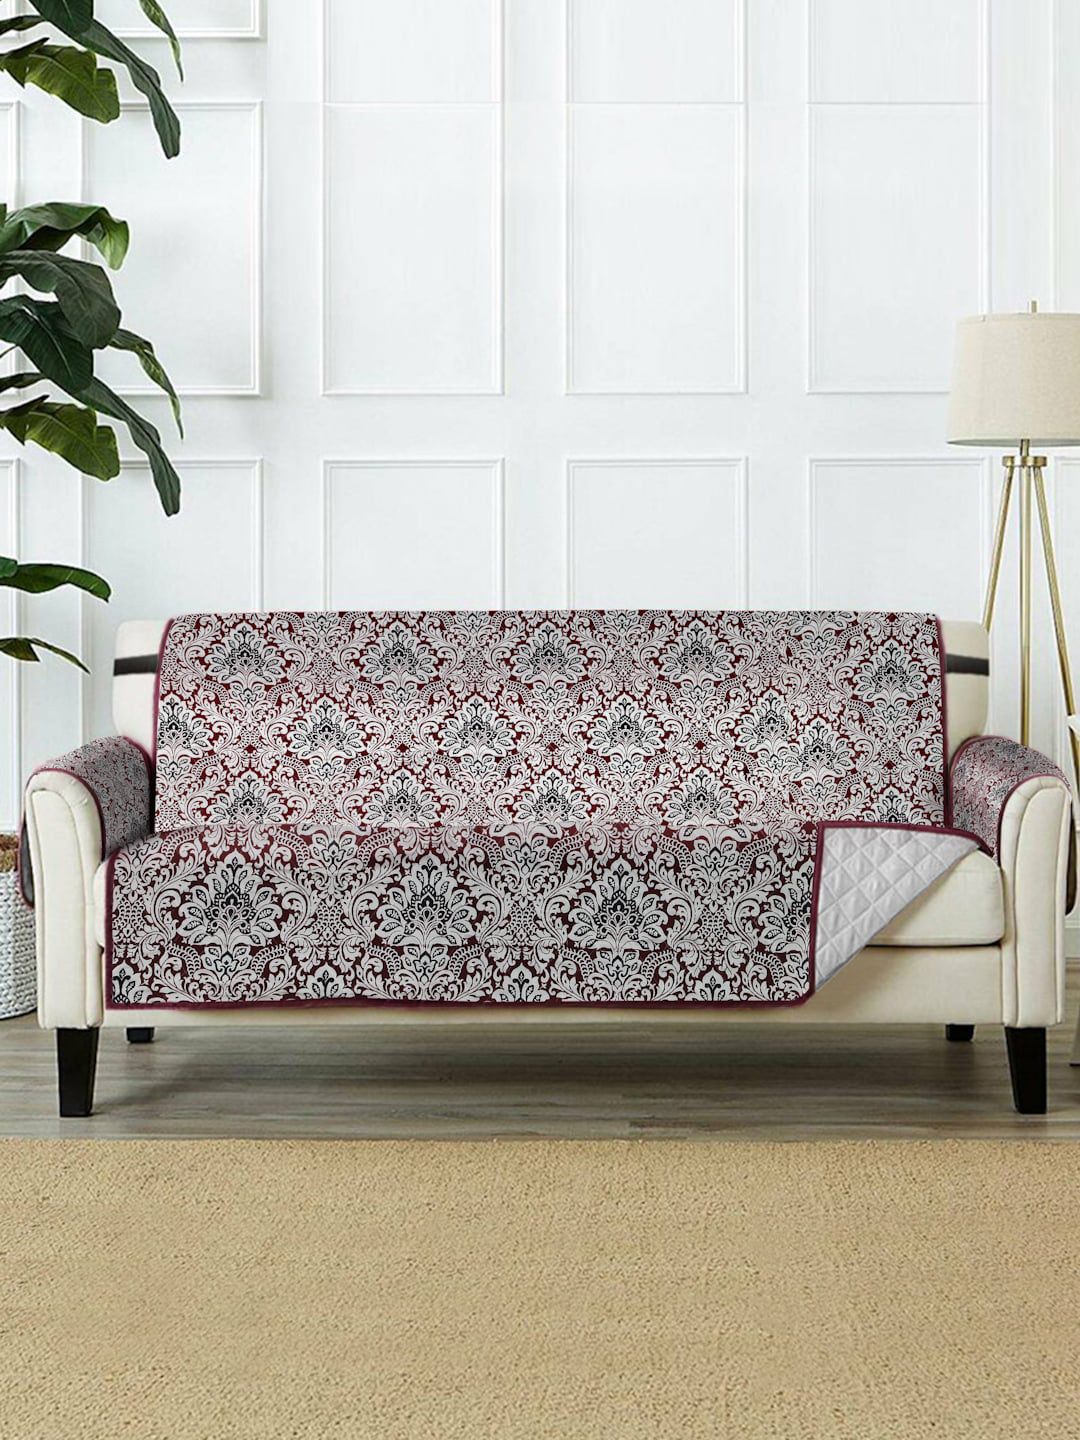 Rajasthan Decor Maroon & Grey Printed Cotton Sofa Covers Price in India